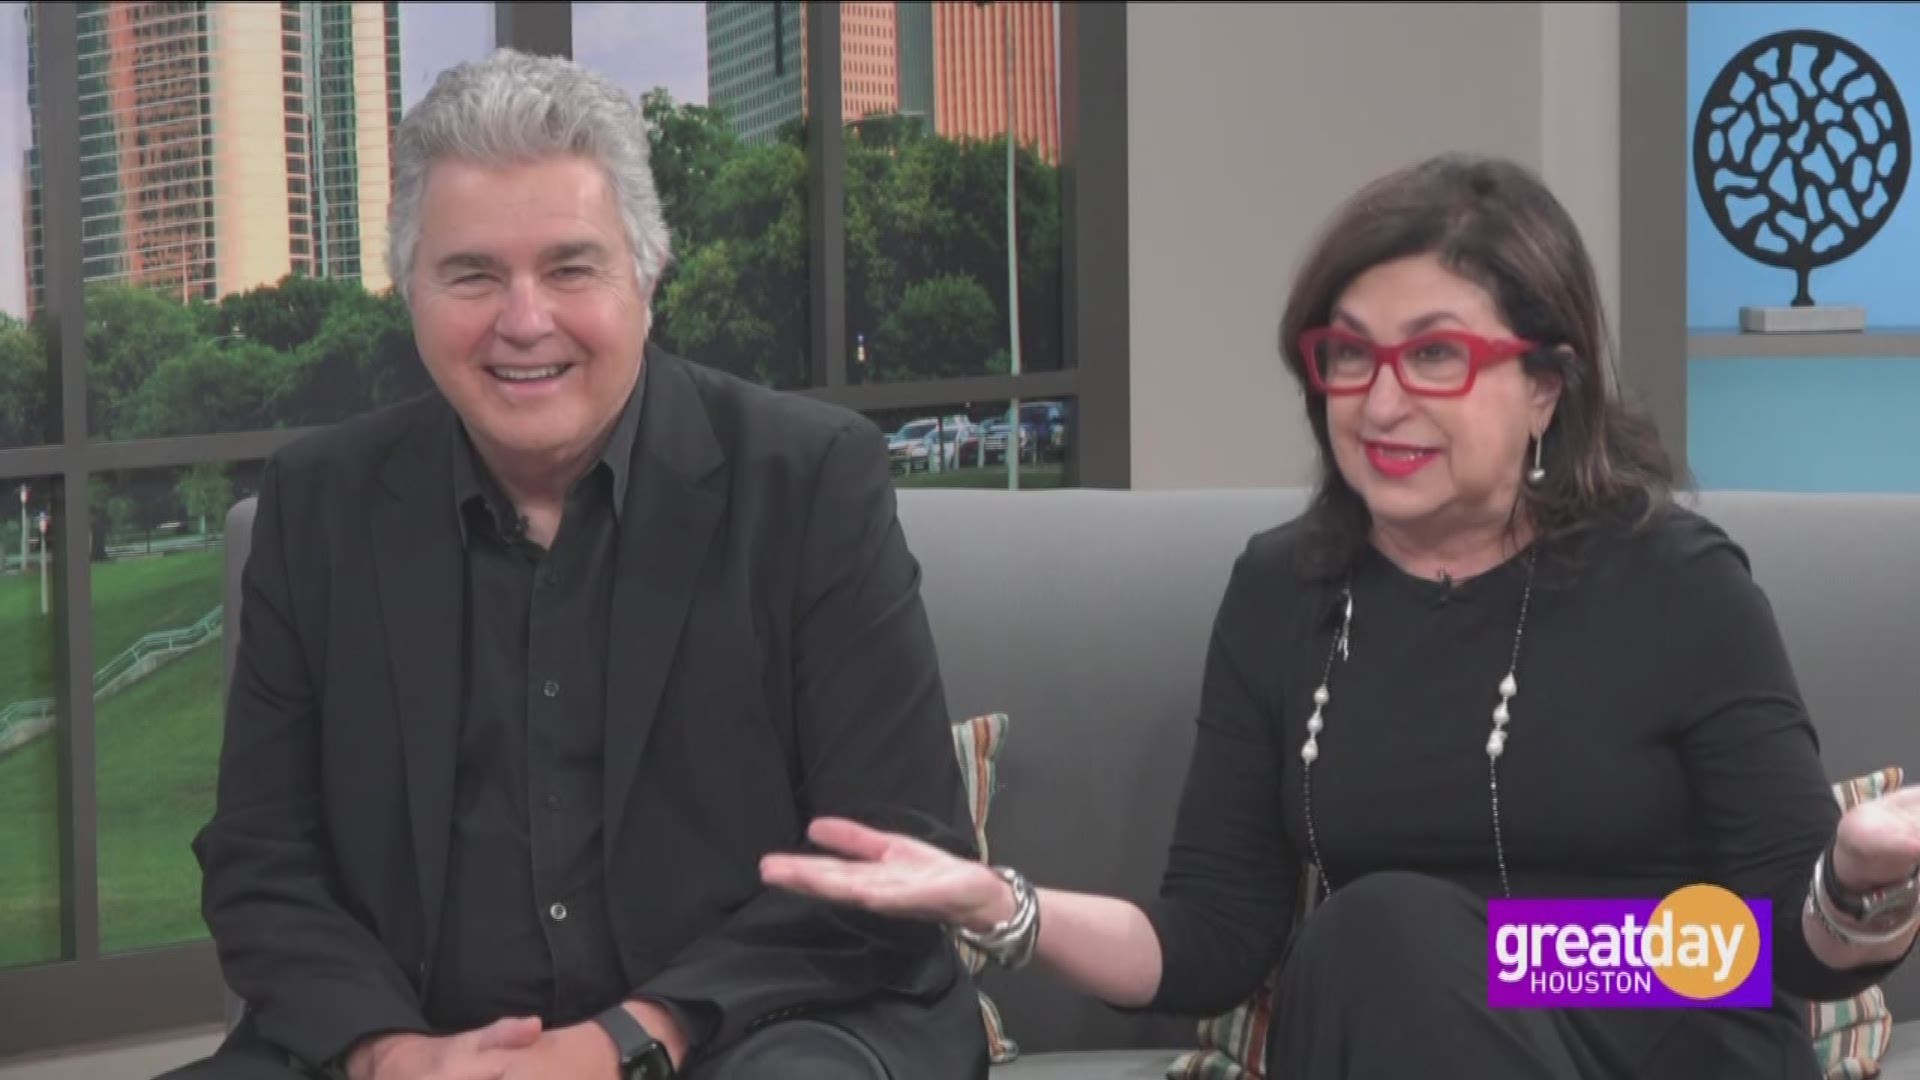 Steve Tyrell is a Grammy-winning vocalist and Roz Pactor is the blogger for "My Red Glasses".